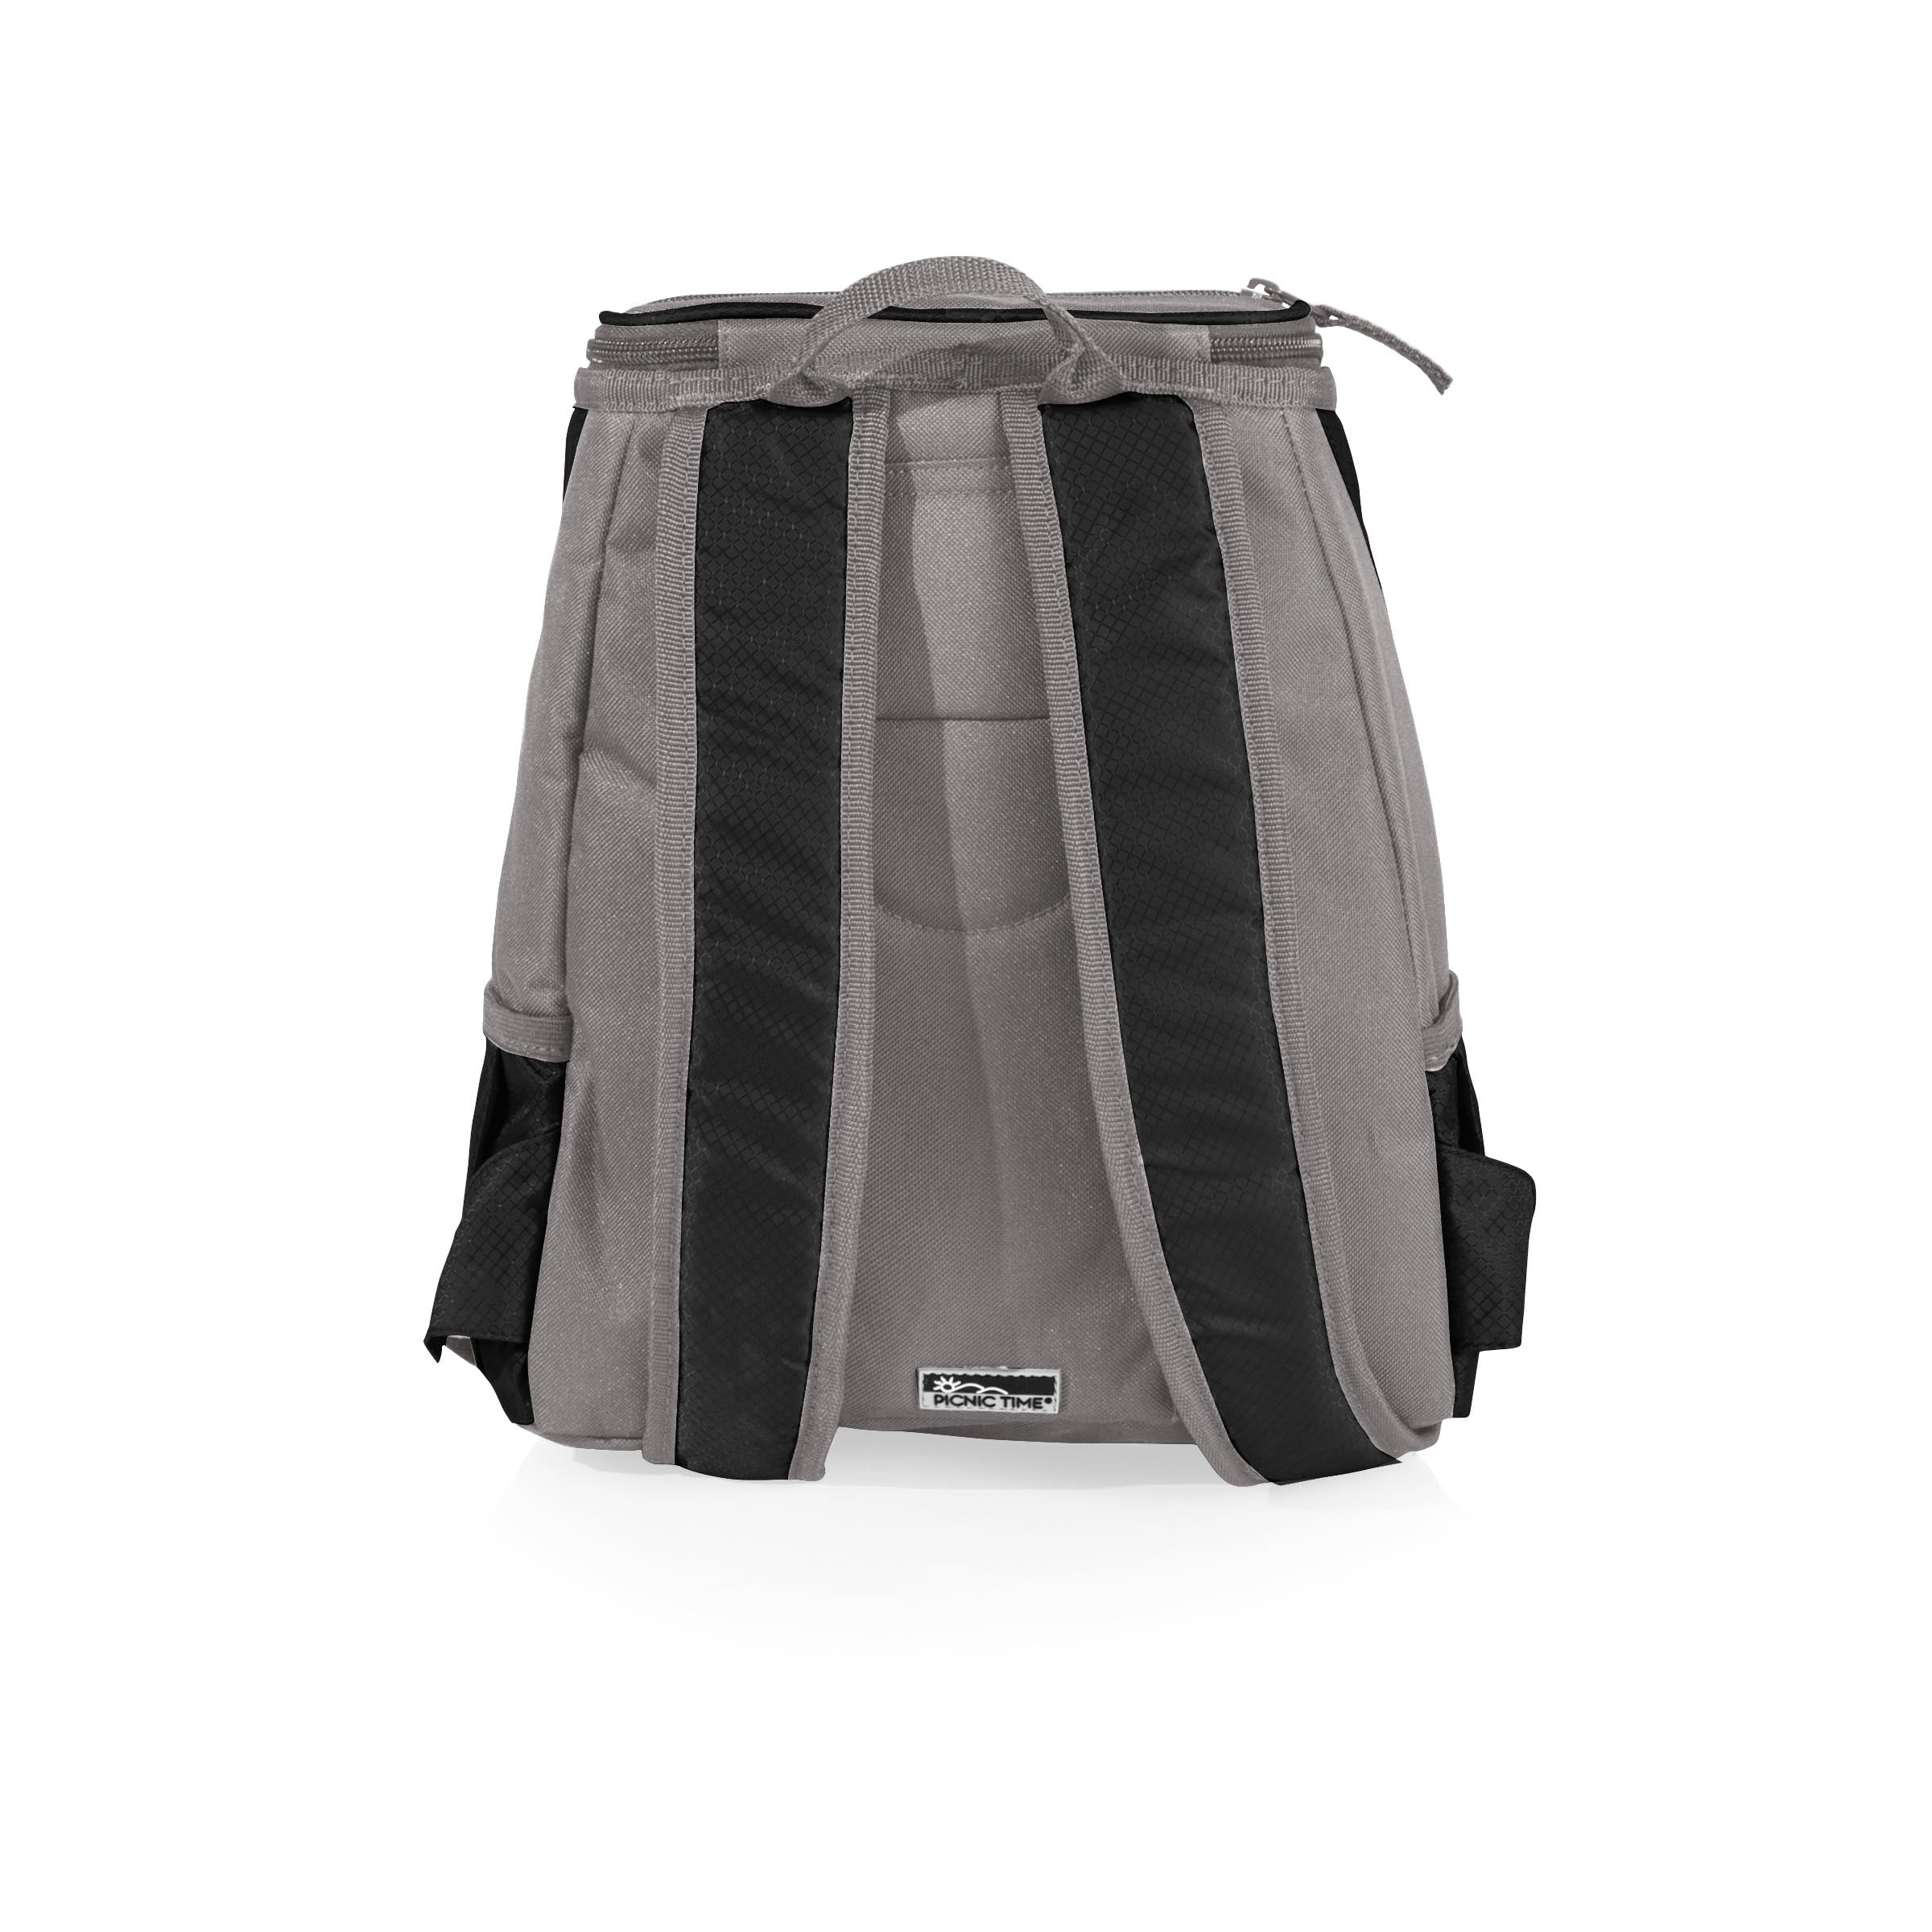 Los Angeles Chargers - PTX Backpack Cooler